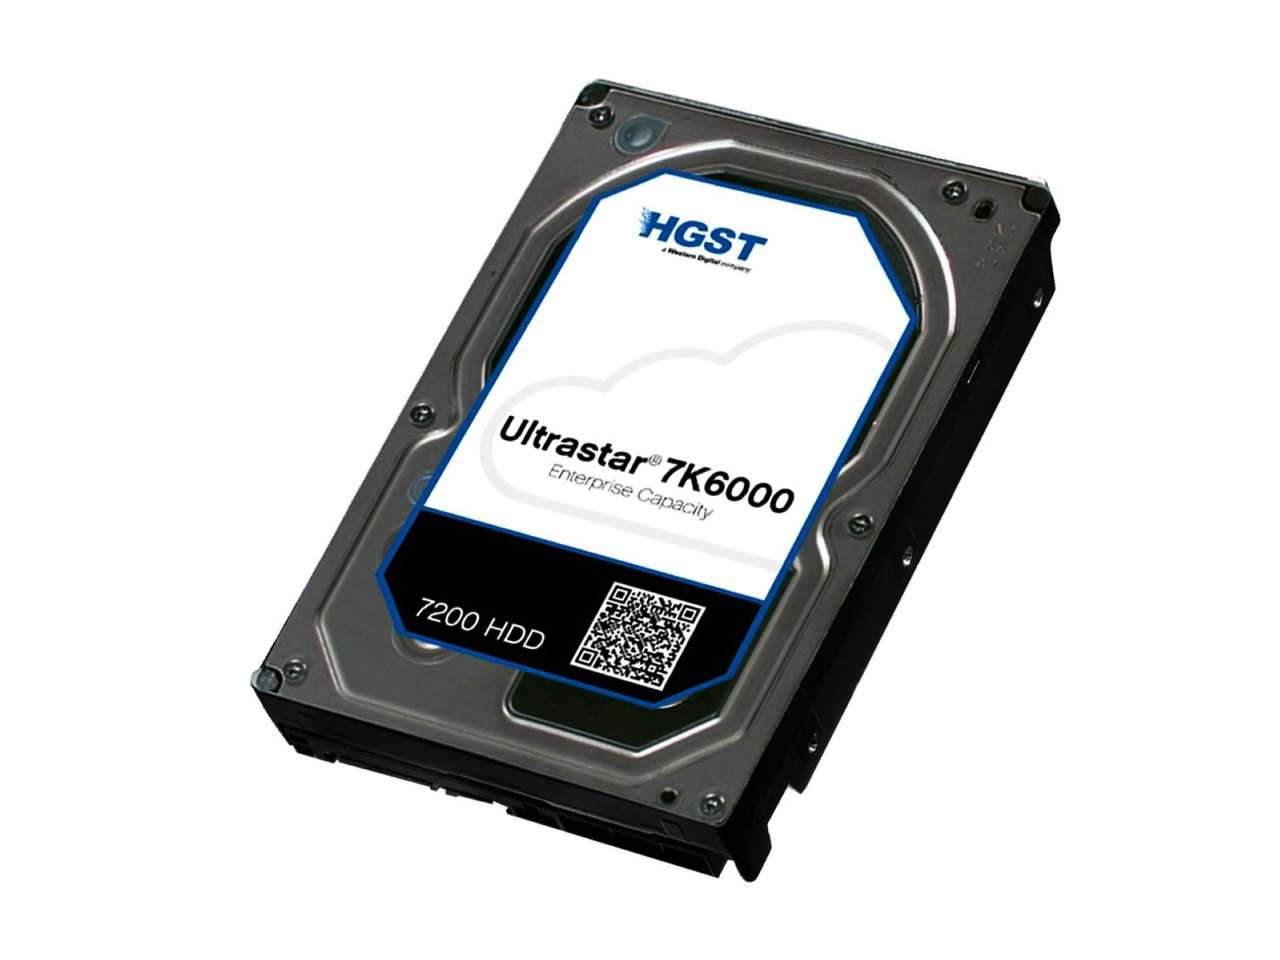 HGST Ultrastar 7K6000 0F22956  HUS726040ALS211 4TB 7.2K RPM SAS 12Gb/s 512n 128MB Cache 3.5" TCG Manufacturer Recertified HDD